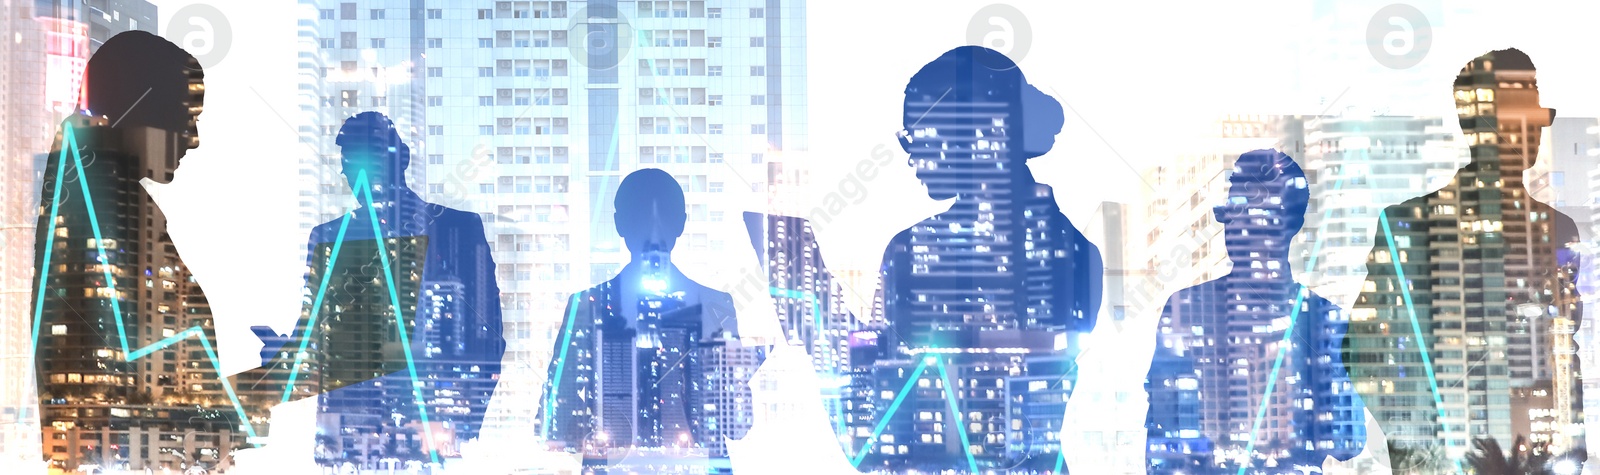 Image of Forex trading. Double exposure of business people and cityscape, banner design